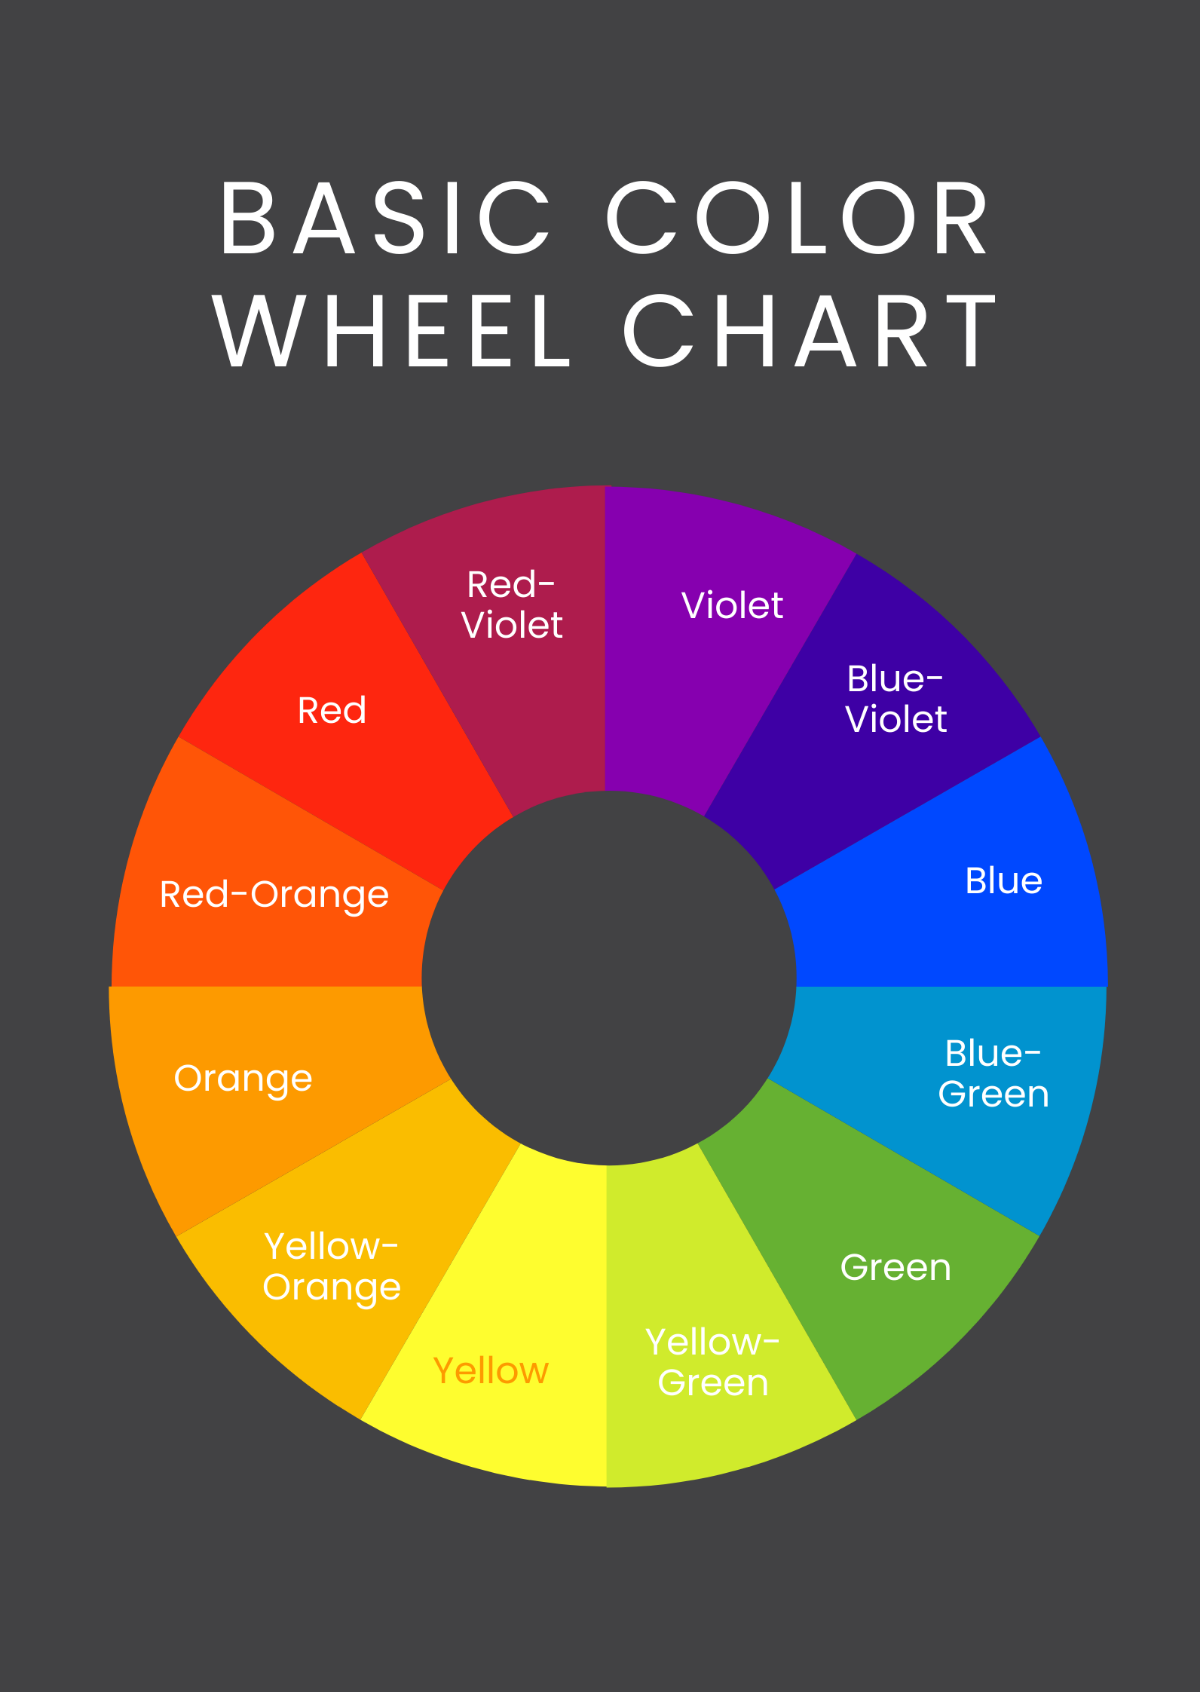 Basic Color Wheel Chart Template